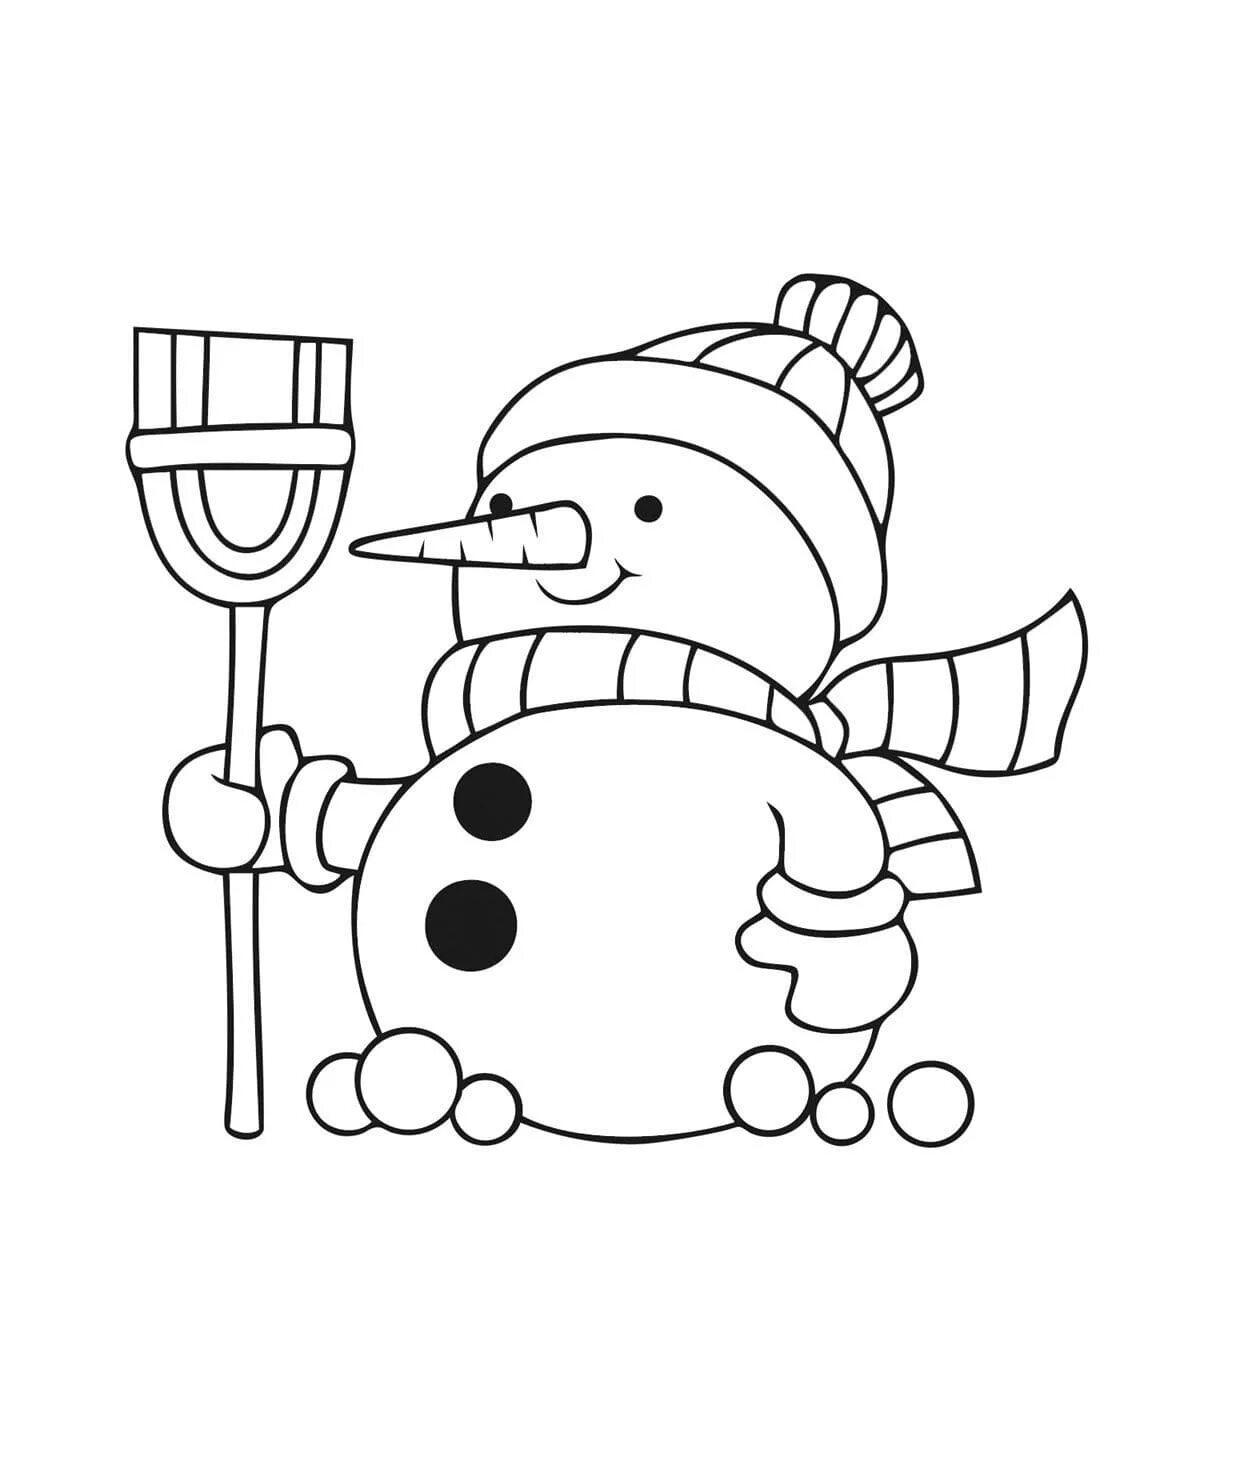 Innovative coloring book snowman with a broom